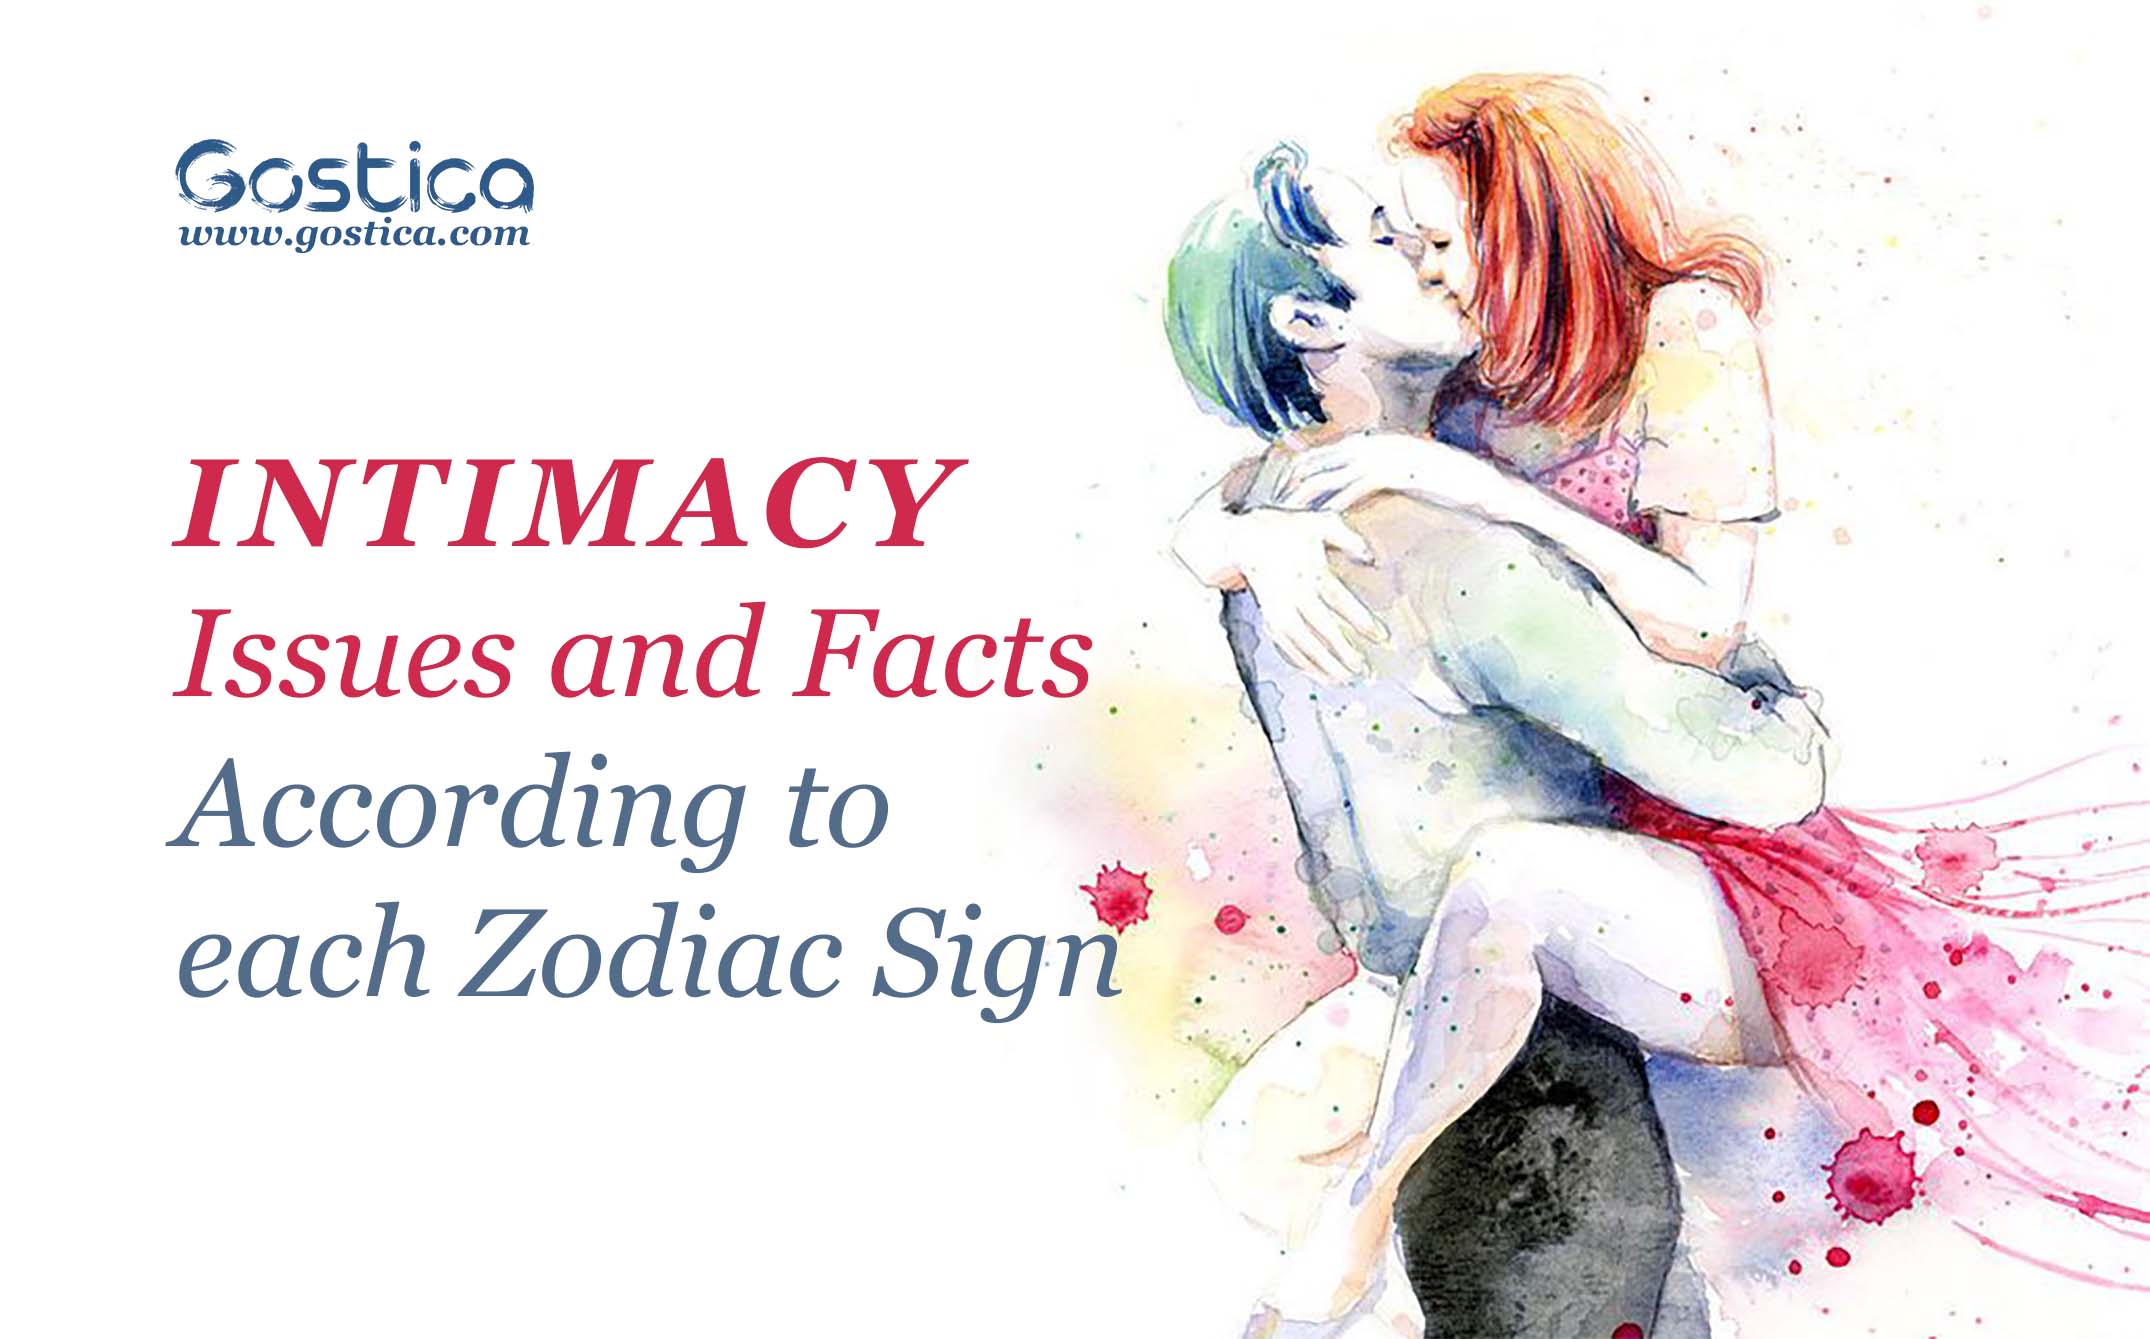 Intimacy-Issues-and-Facts-according-to-each-Zodiac-Sign.jpg